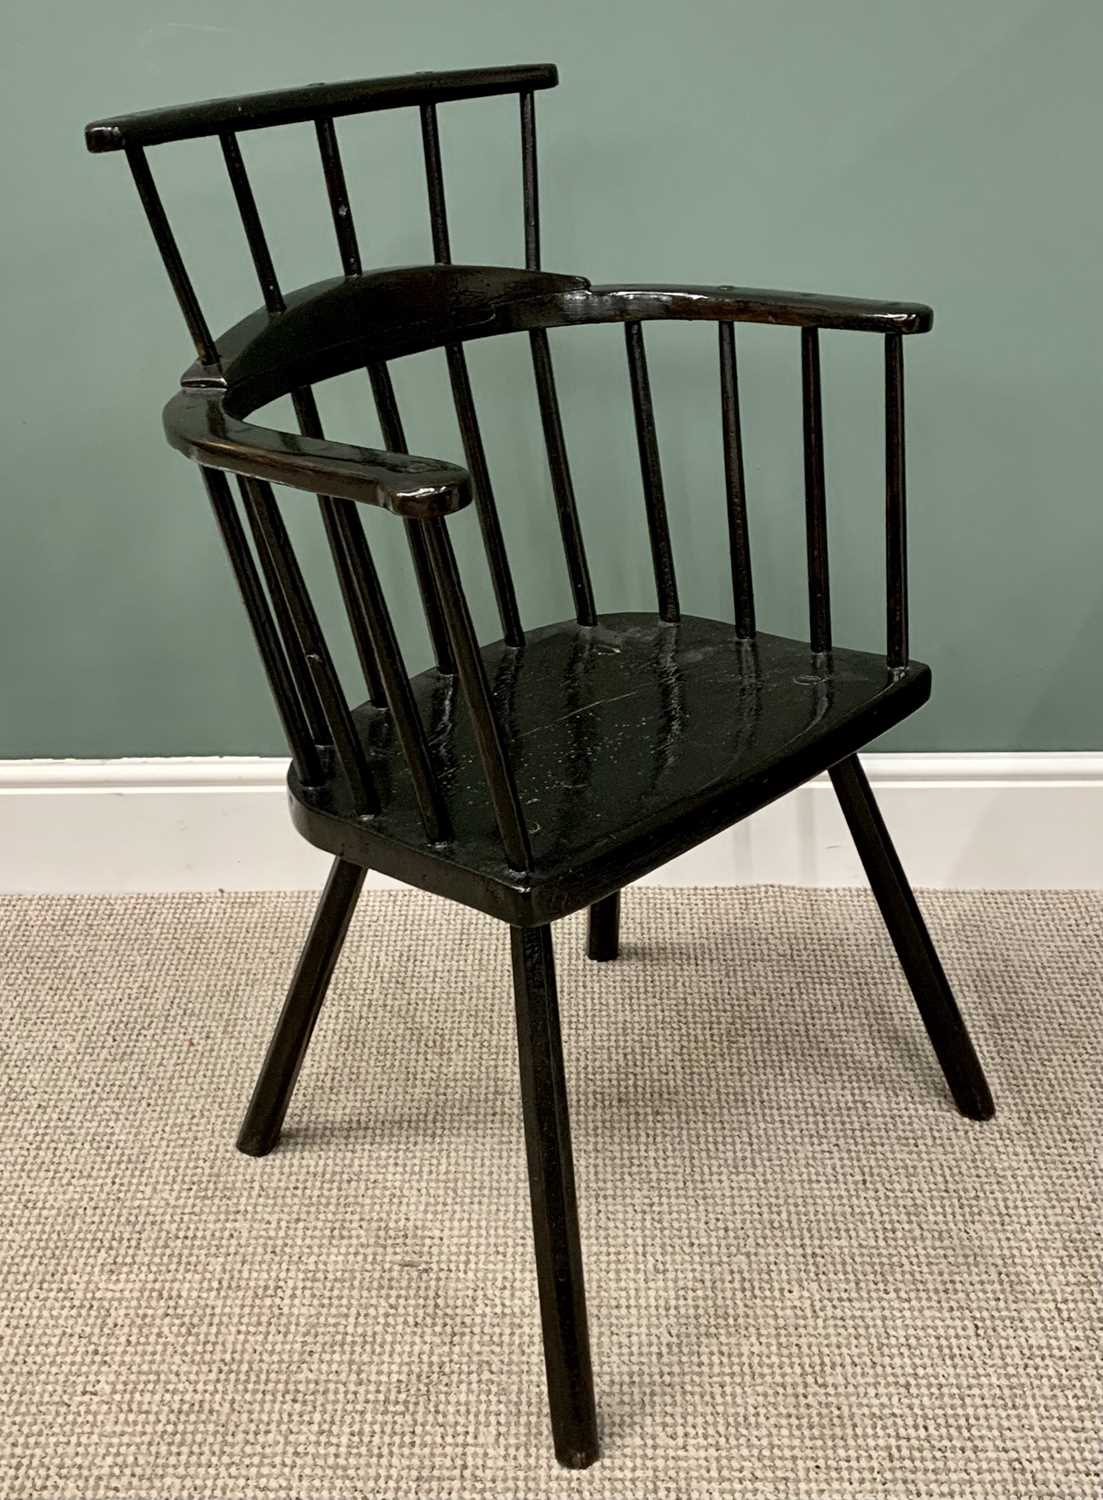 PAINTED PRIMITIVE ASH & ELM STICK-BACK CHAIR, believed Welsh, circa 1800 and possibly later, 94cms - Image 2 of 3